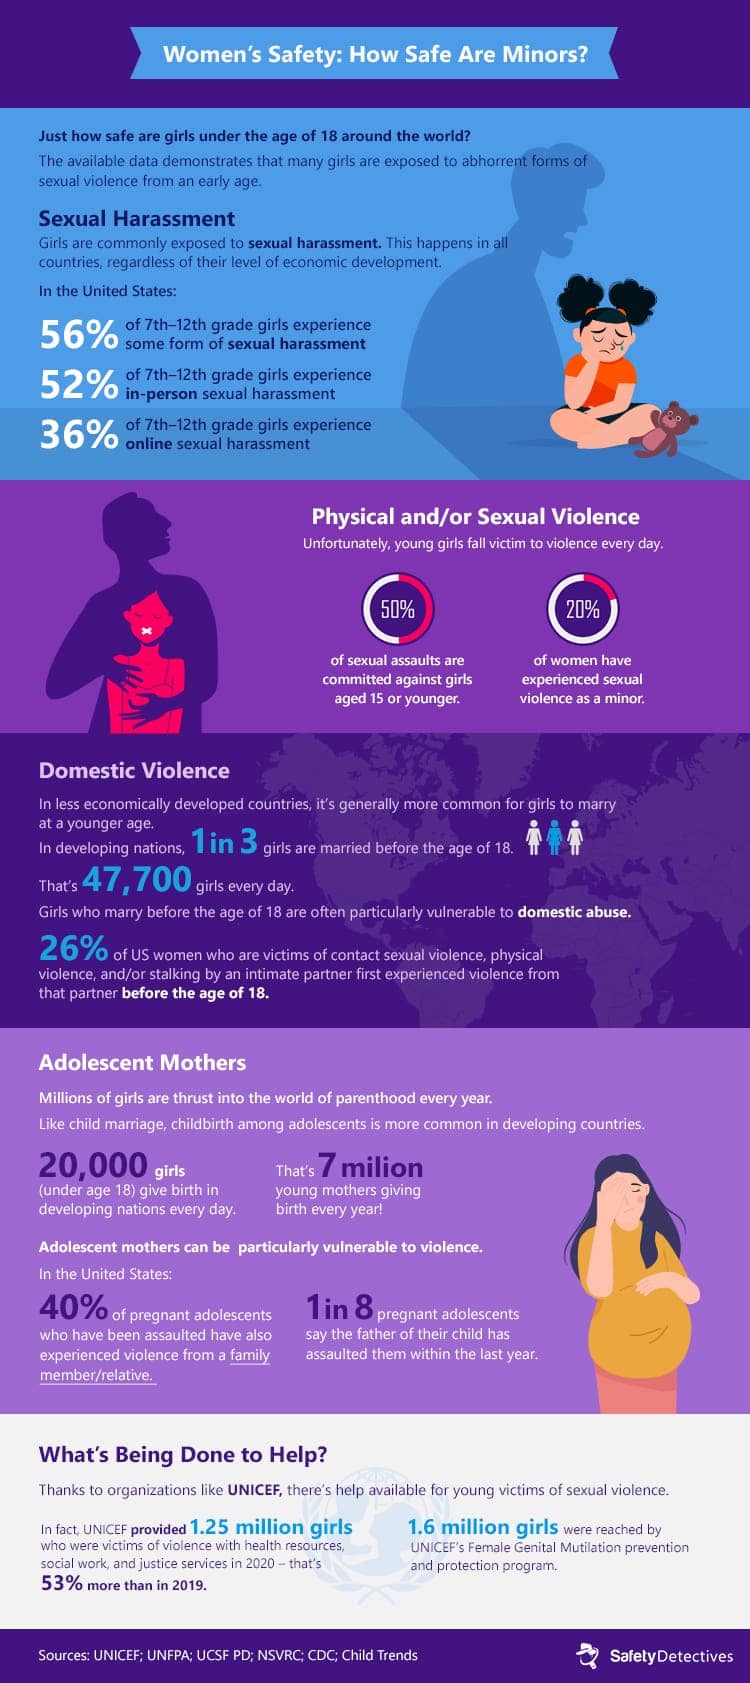 More Data on Violence Against Women and Girls